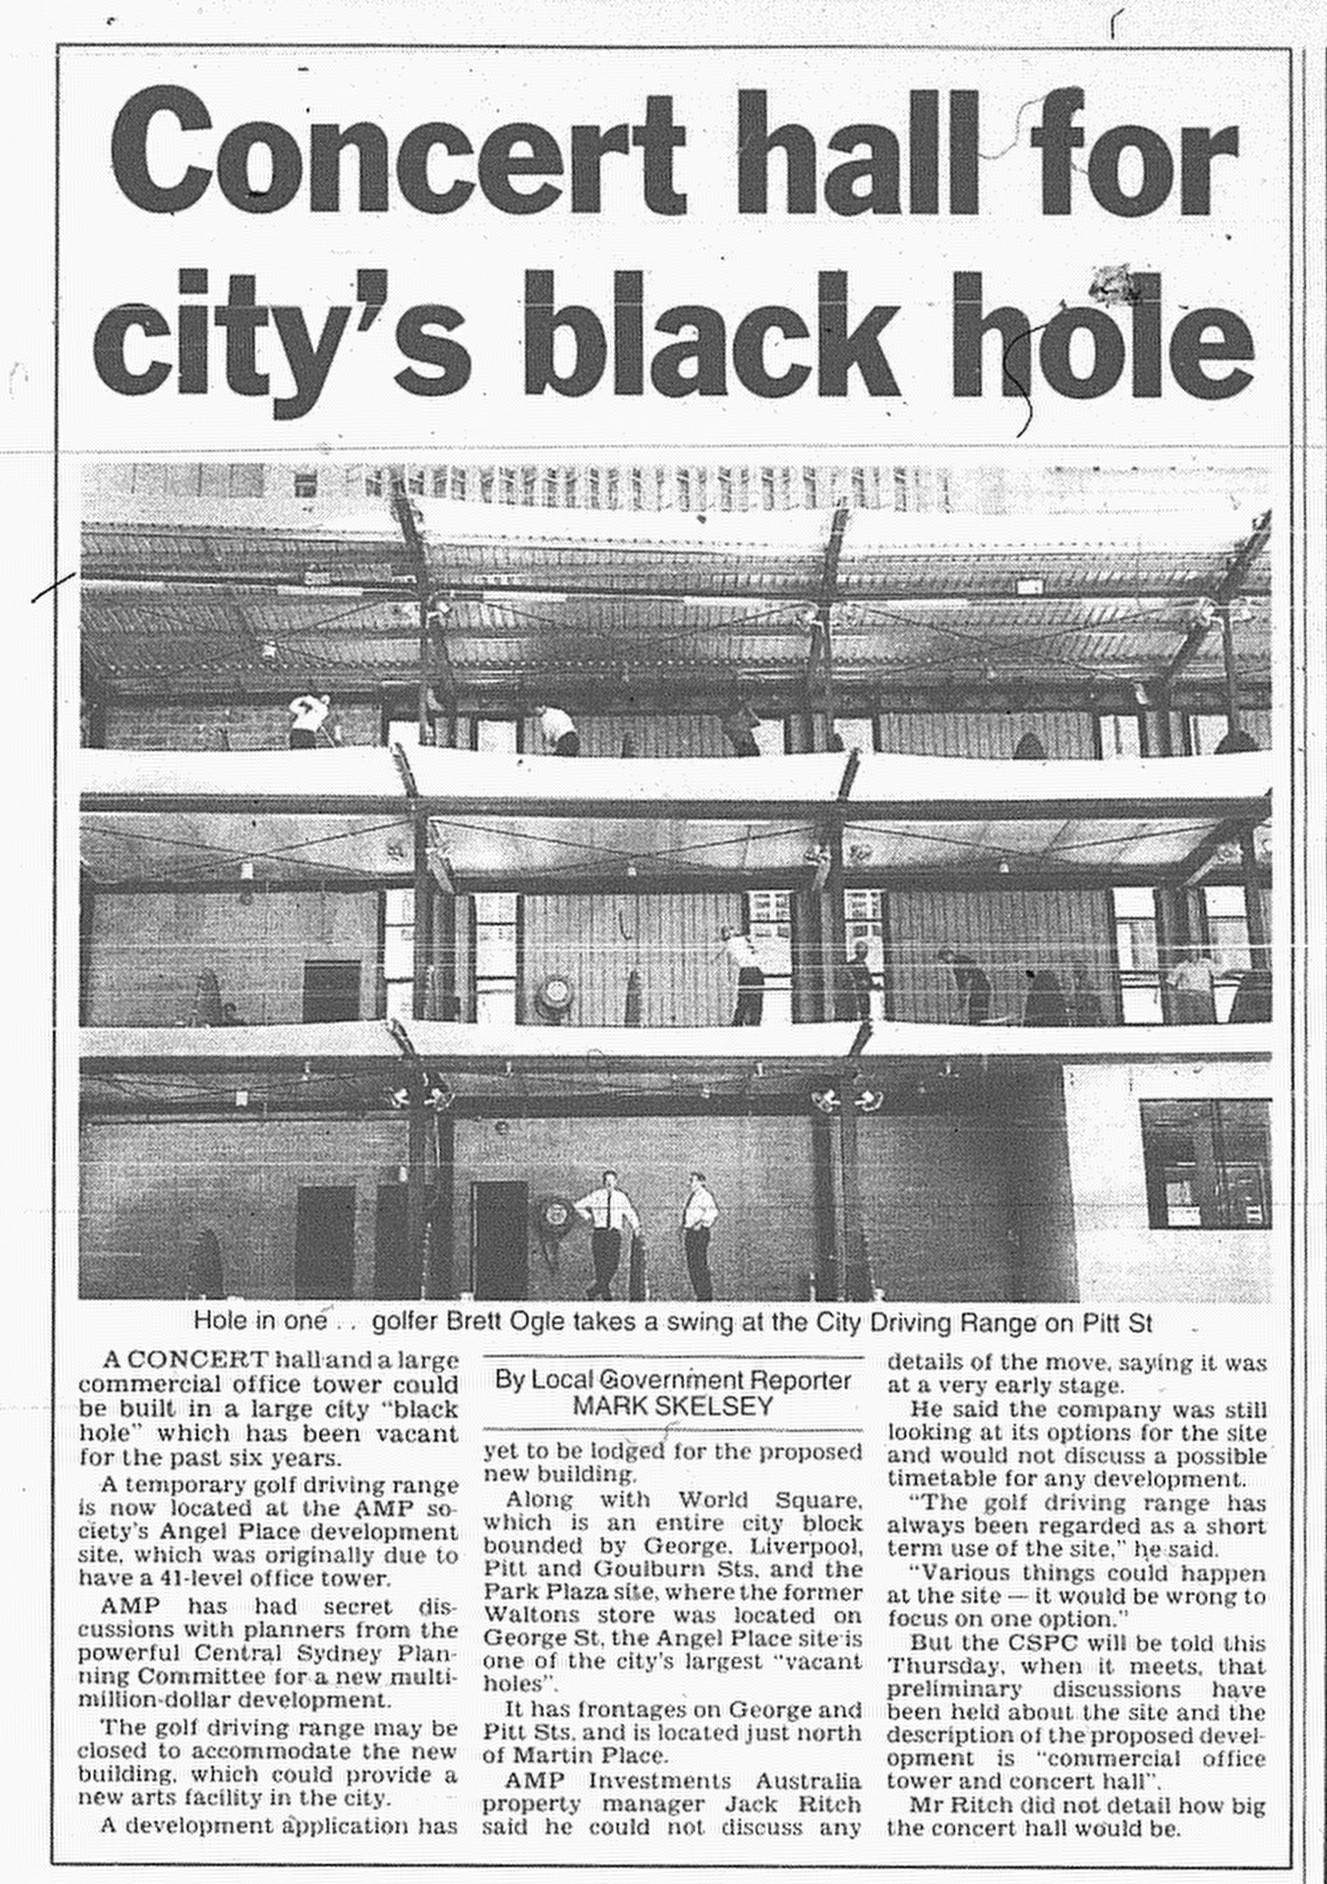 Angel Place August 16 1995 daily telegraph 27